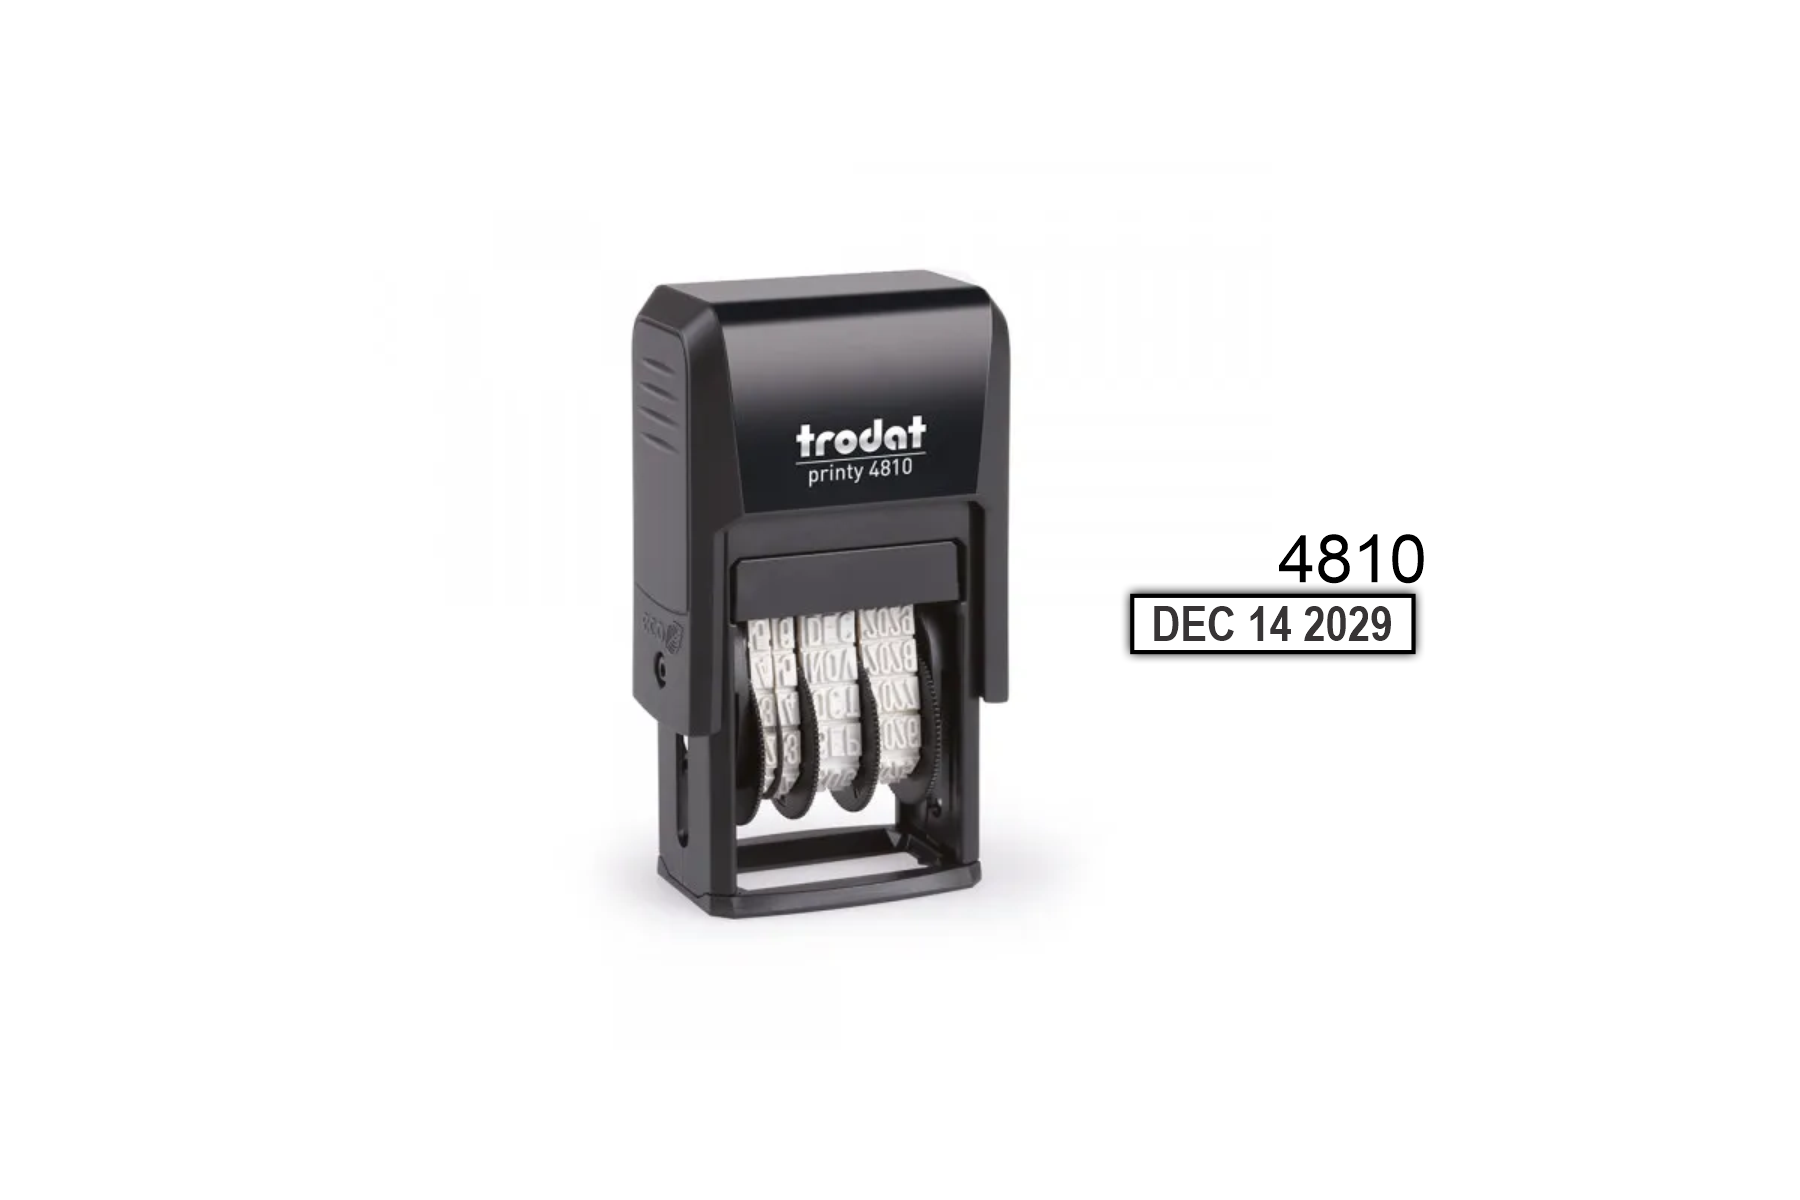 DATE STAMP PAID RECEIVED POSTED CHECKED E-MAILED TRODAT 4750 SELF INKING  RUBBER